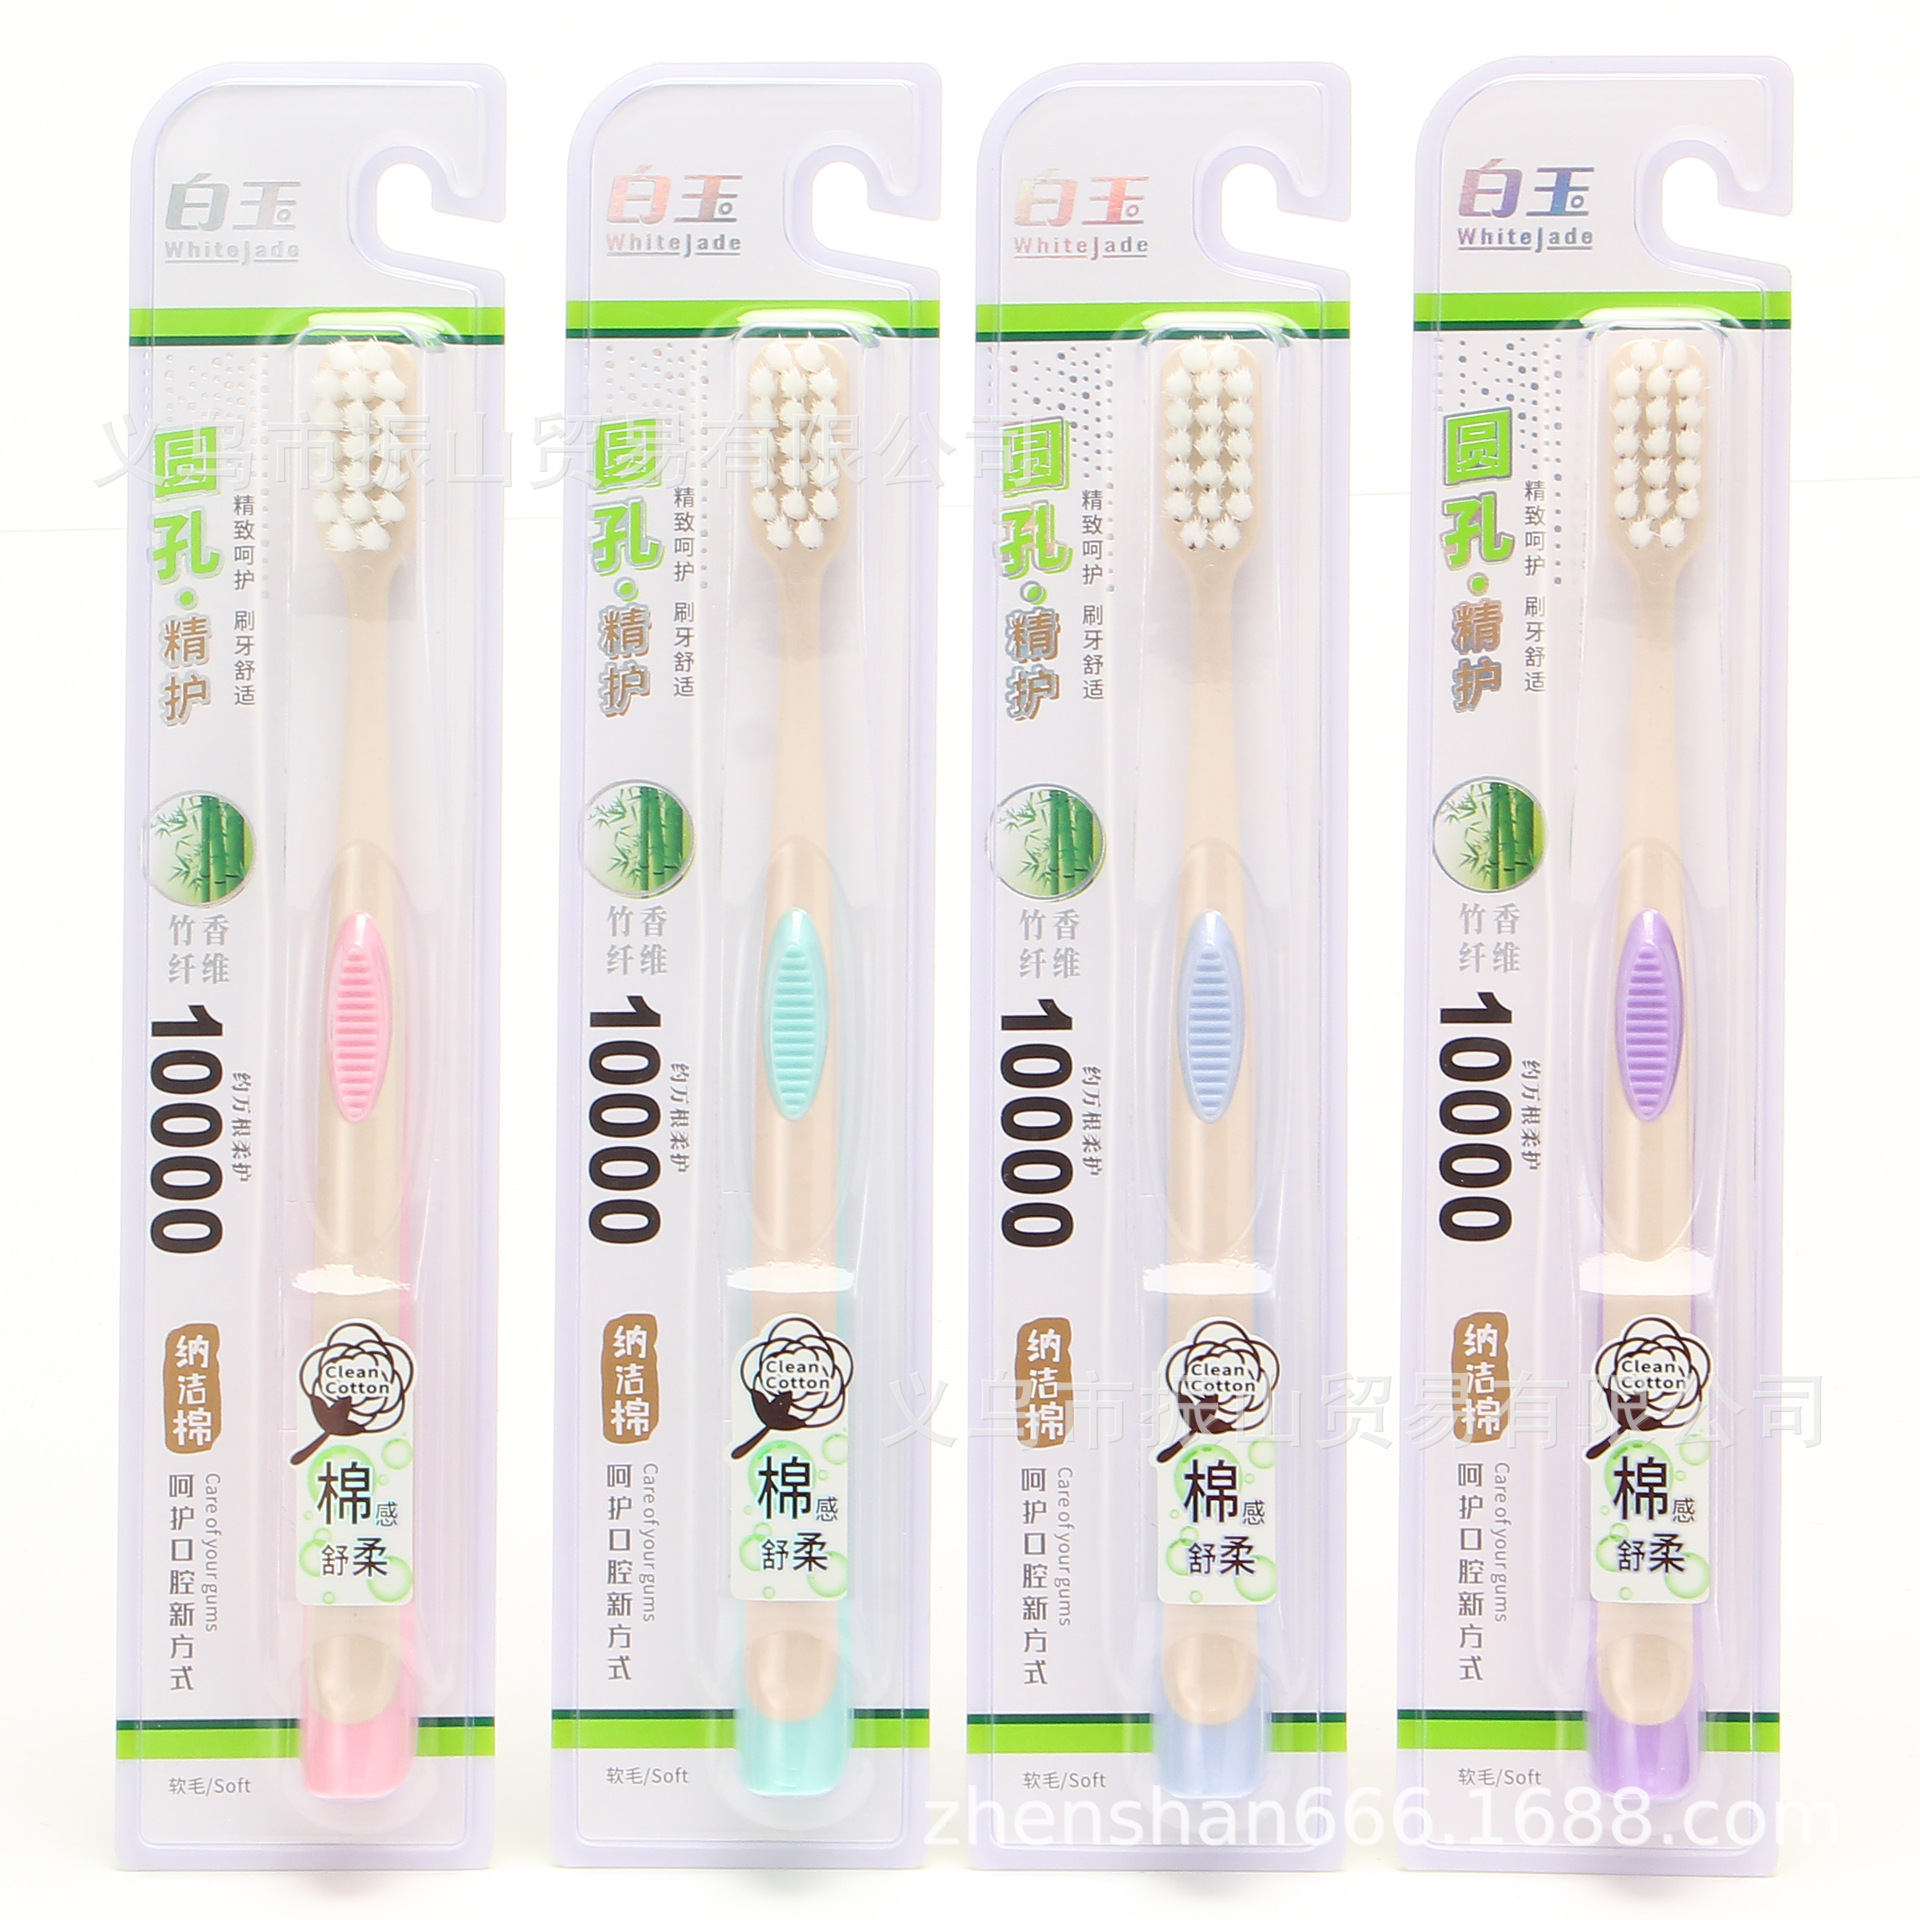 white jade 036 round hole fine care delicate care bamboo fiber about ten thousand bristle beauty toothbrush